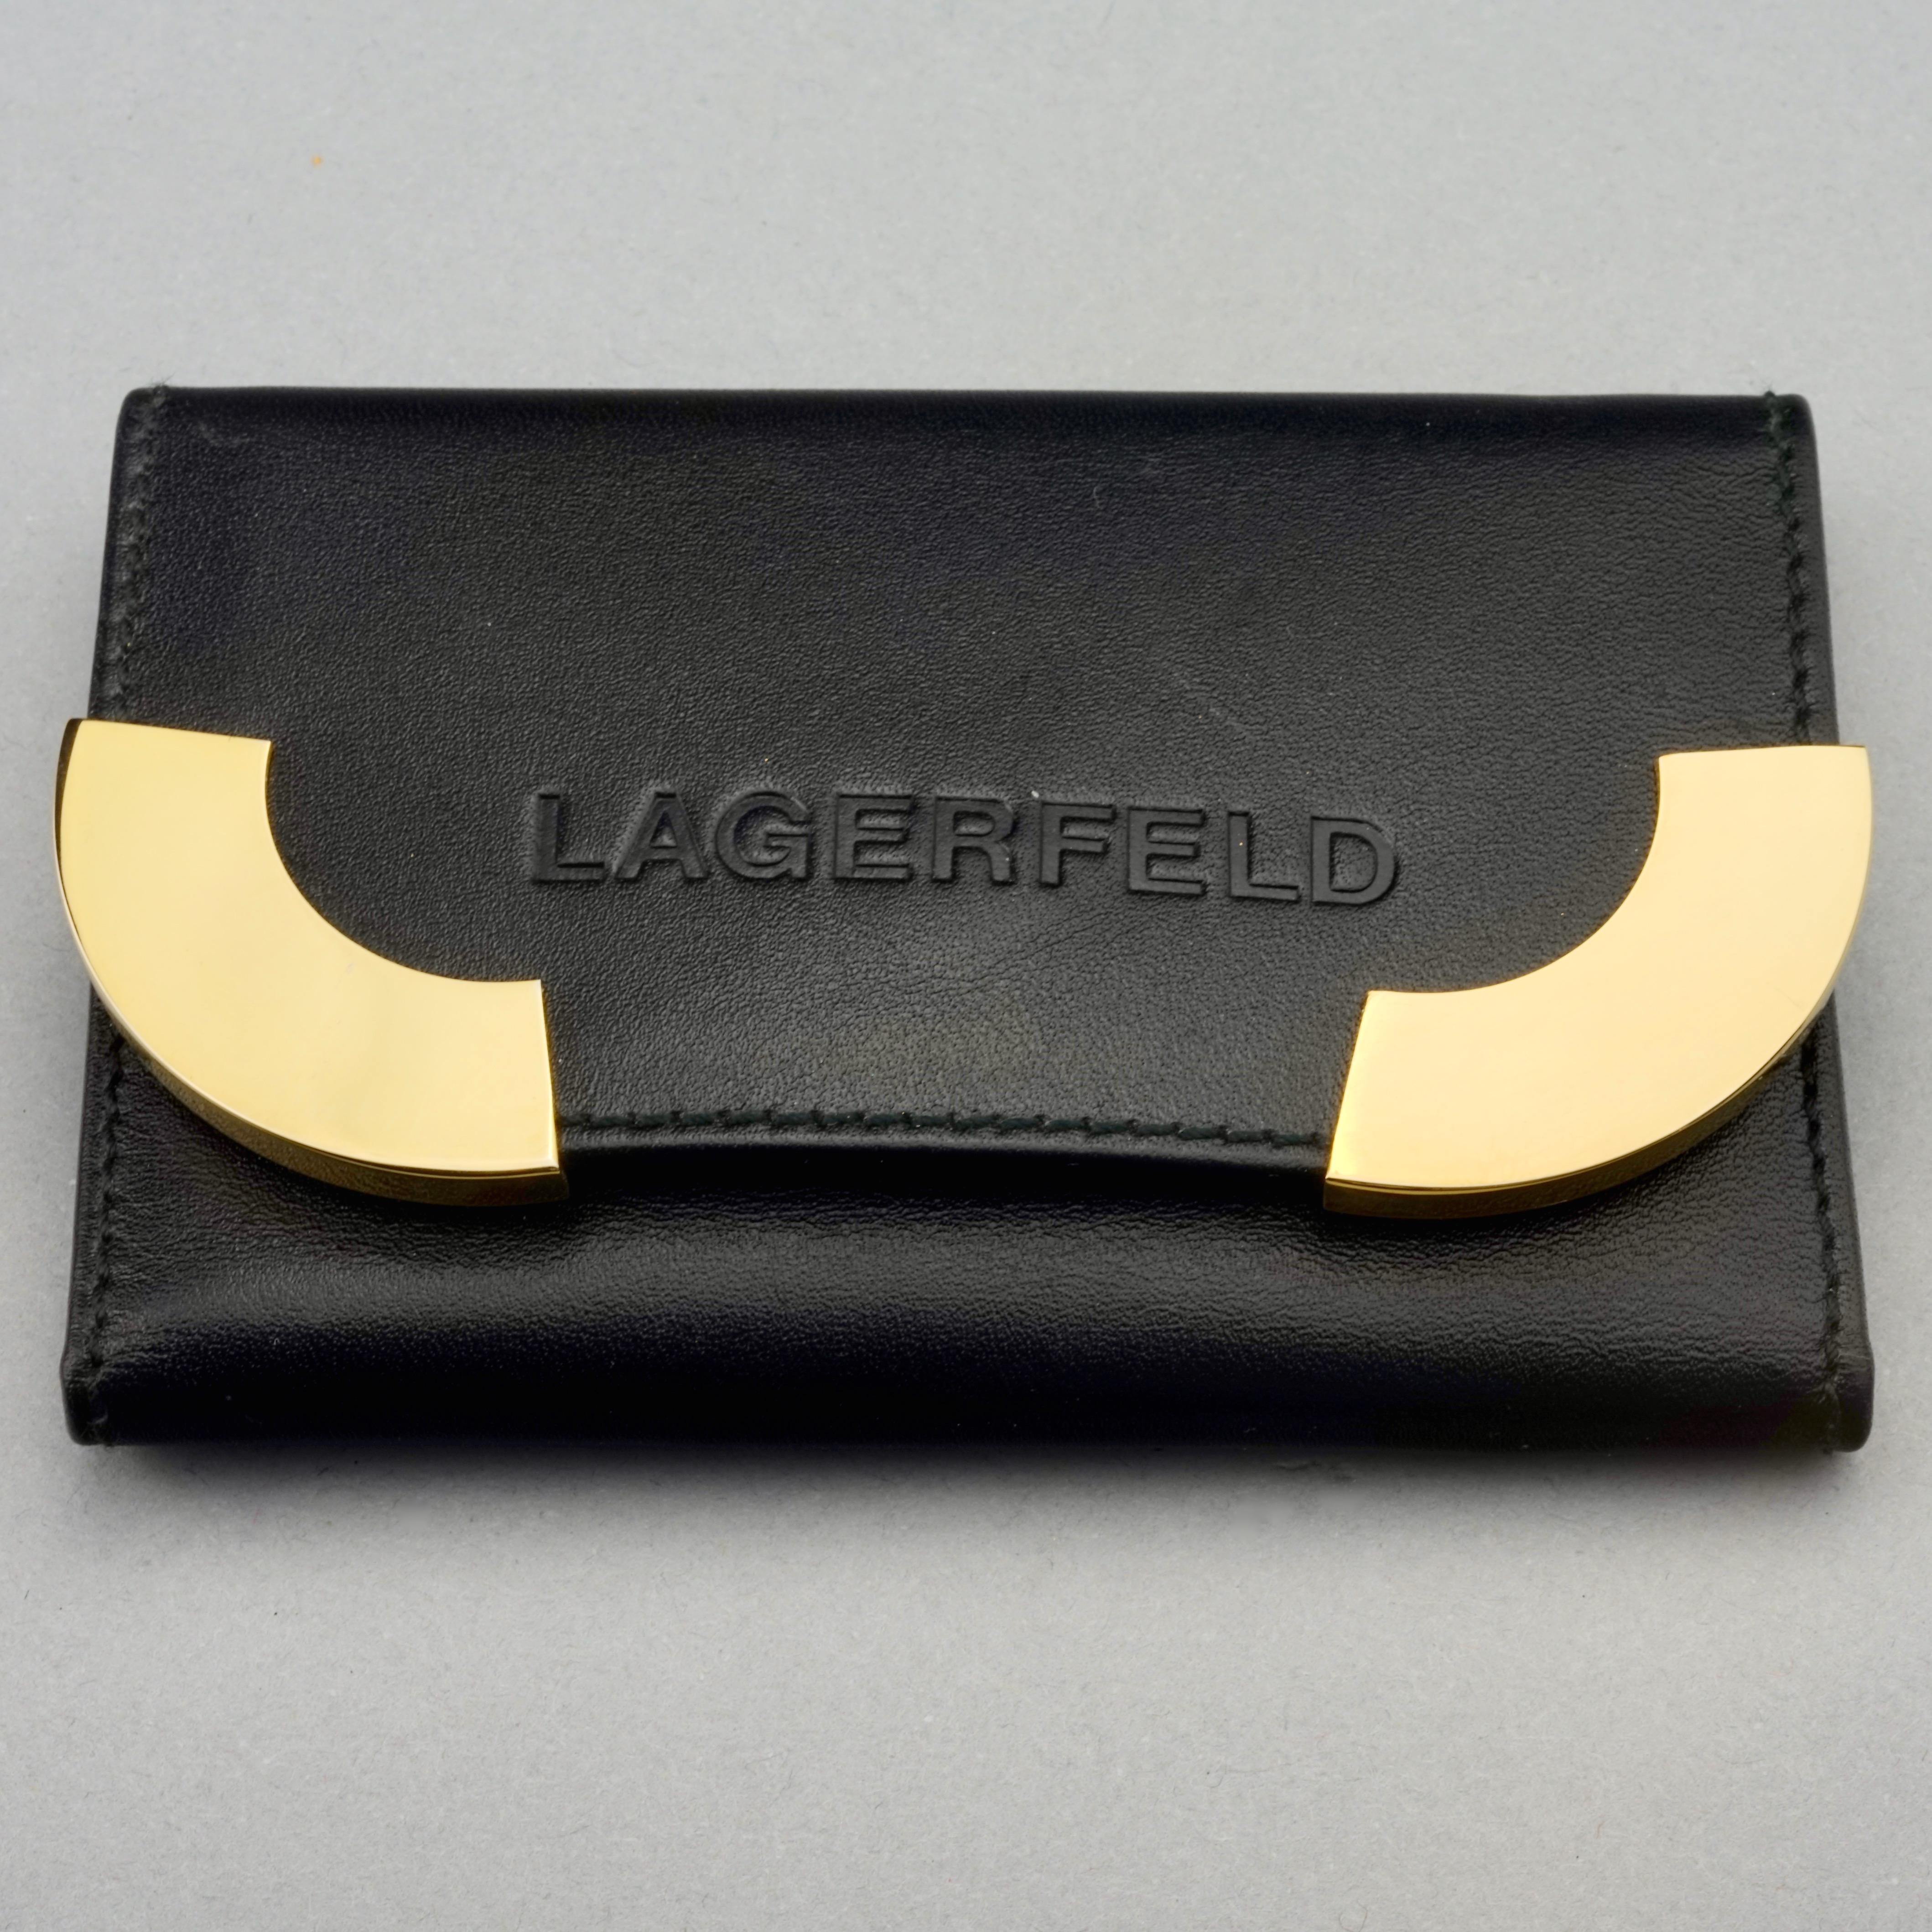 Vintage KARL LAGERFELD Logo Black Leather Key Holder Wallet

Measurements:
Height: 2.75 inches (7 cm)
Width: 4.13 inches (10.5 cm)

Features: 
- 100% Authentic KARL LAGERFELD.
- Black calf leather with spelled LAGERFELD and gold metal embellishment